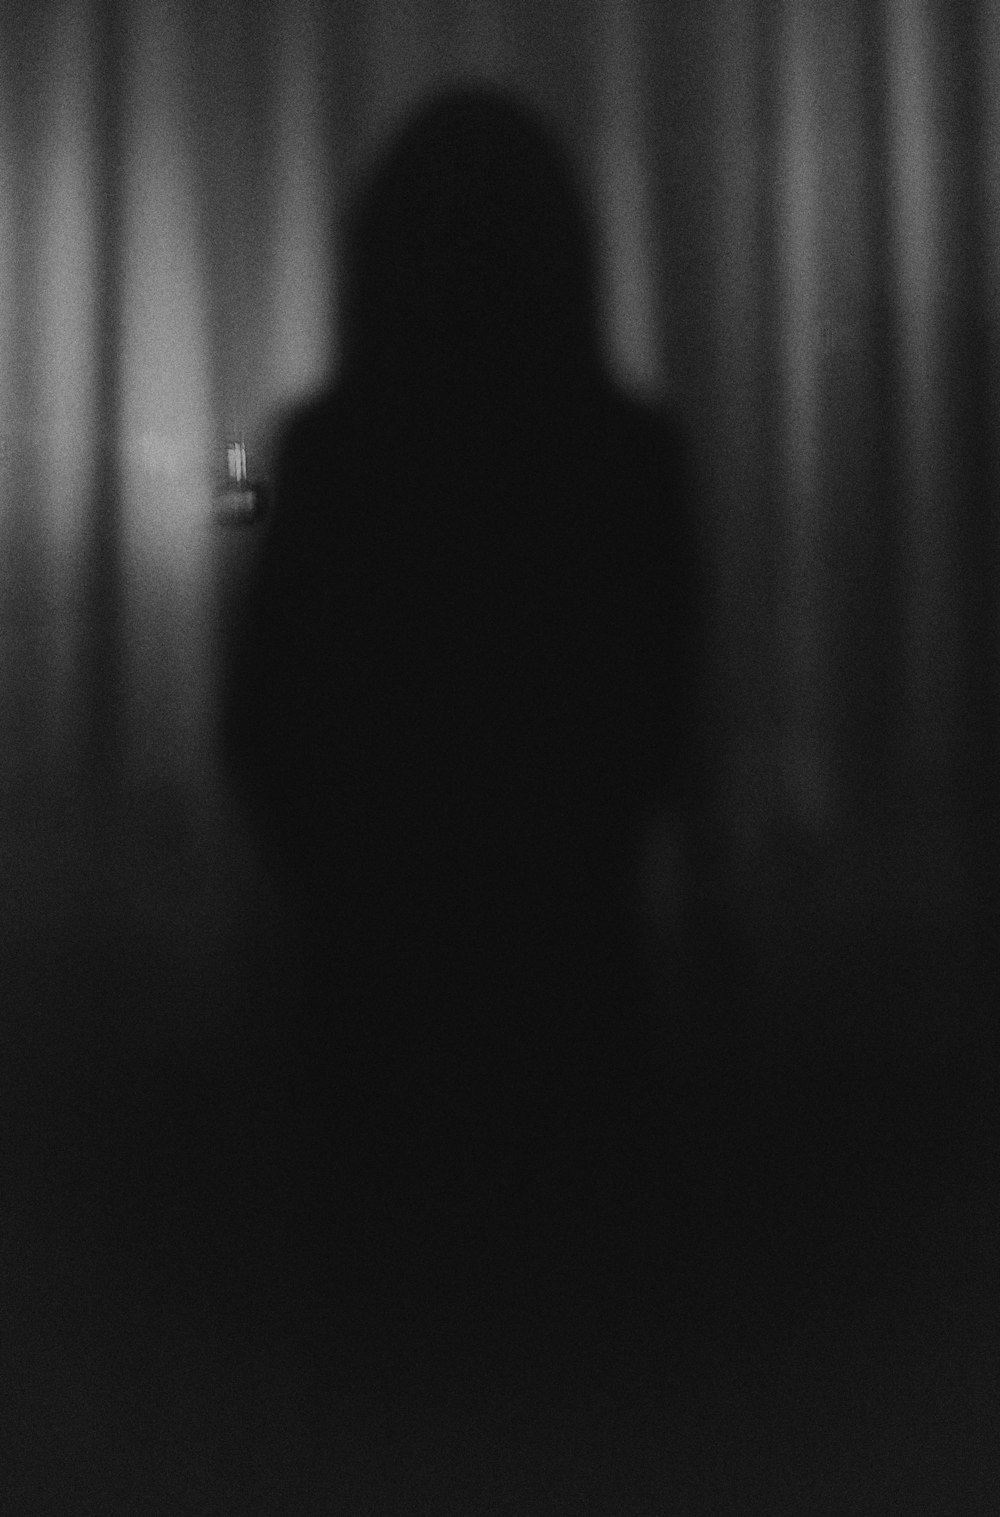 Abstract Dark Pictures Download Free Images On Unsplash